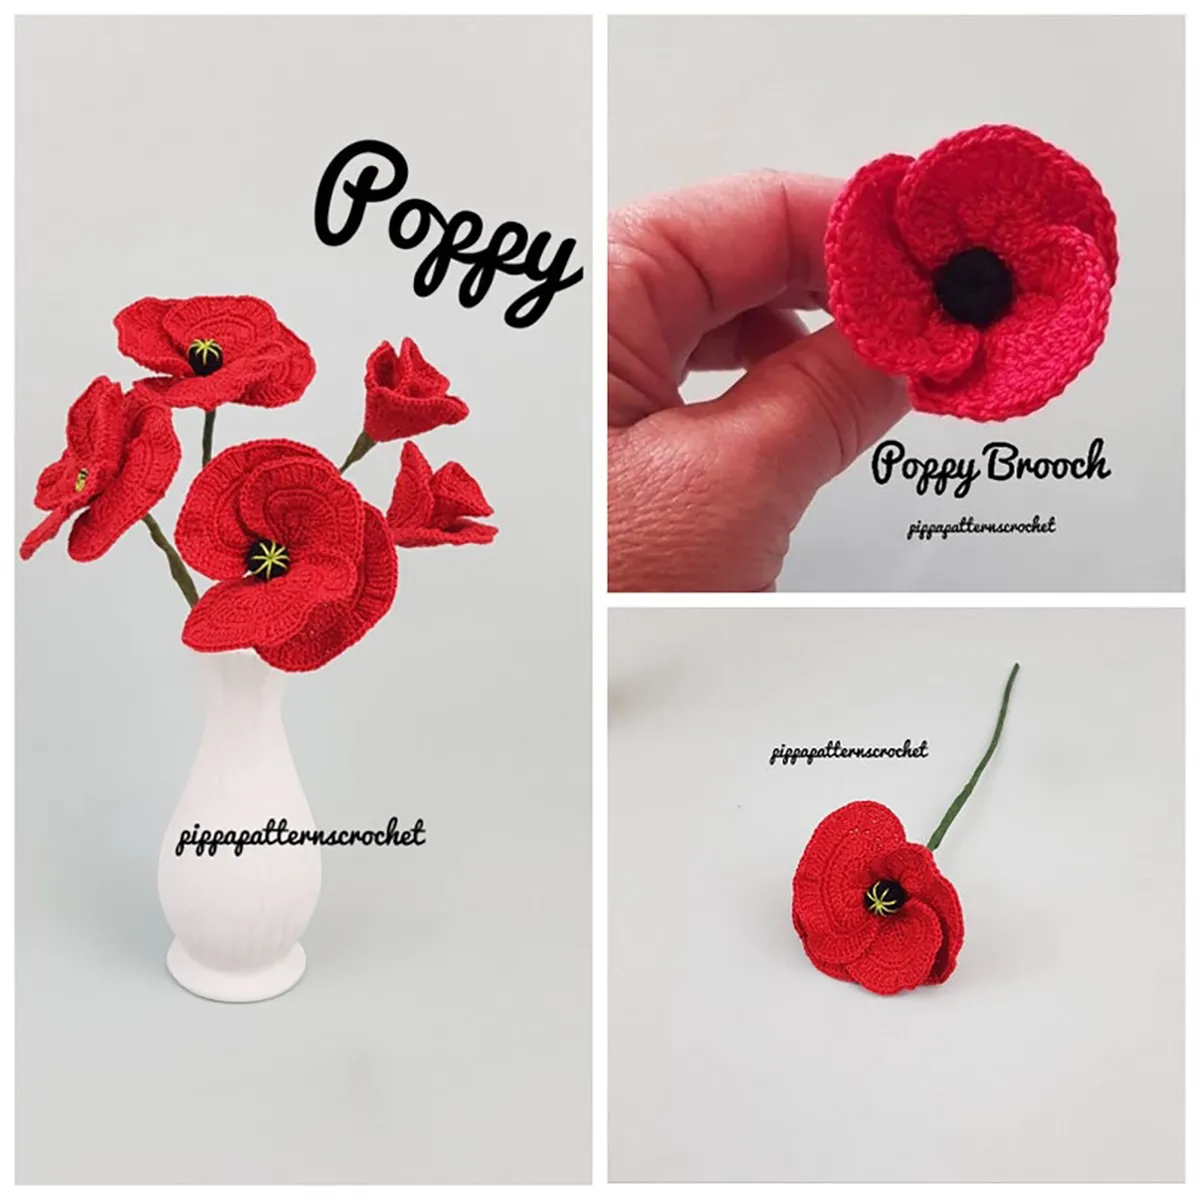 pippapatterns crochet poppy brooch and bouquet